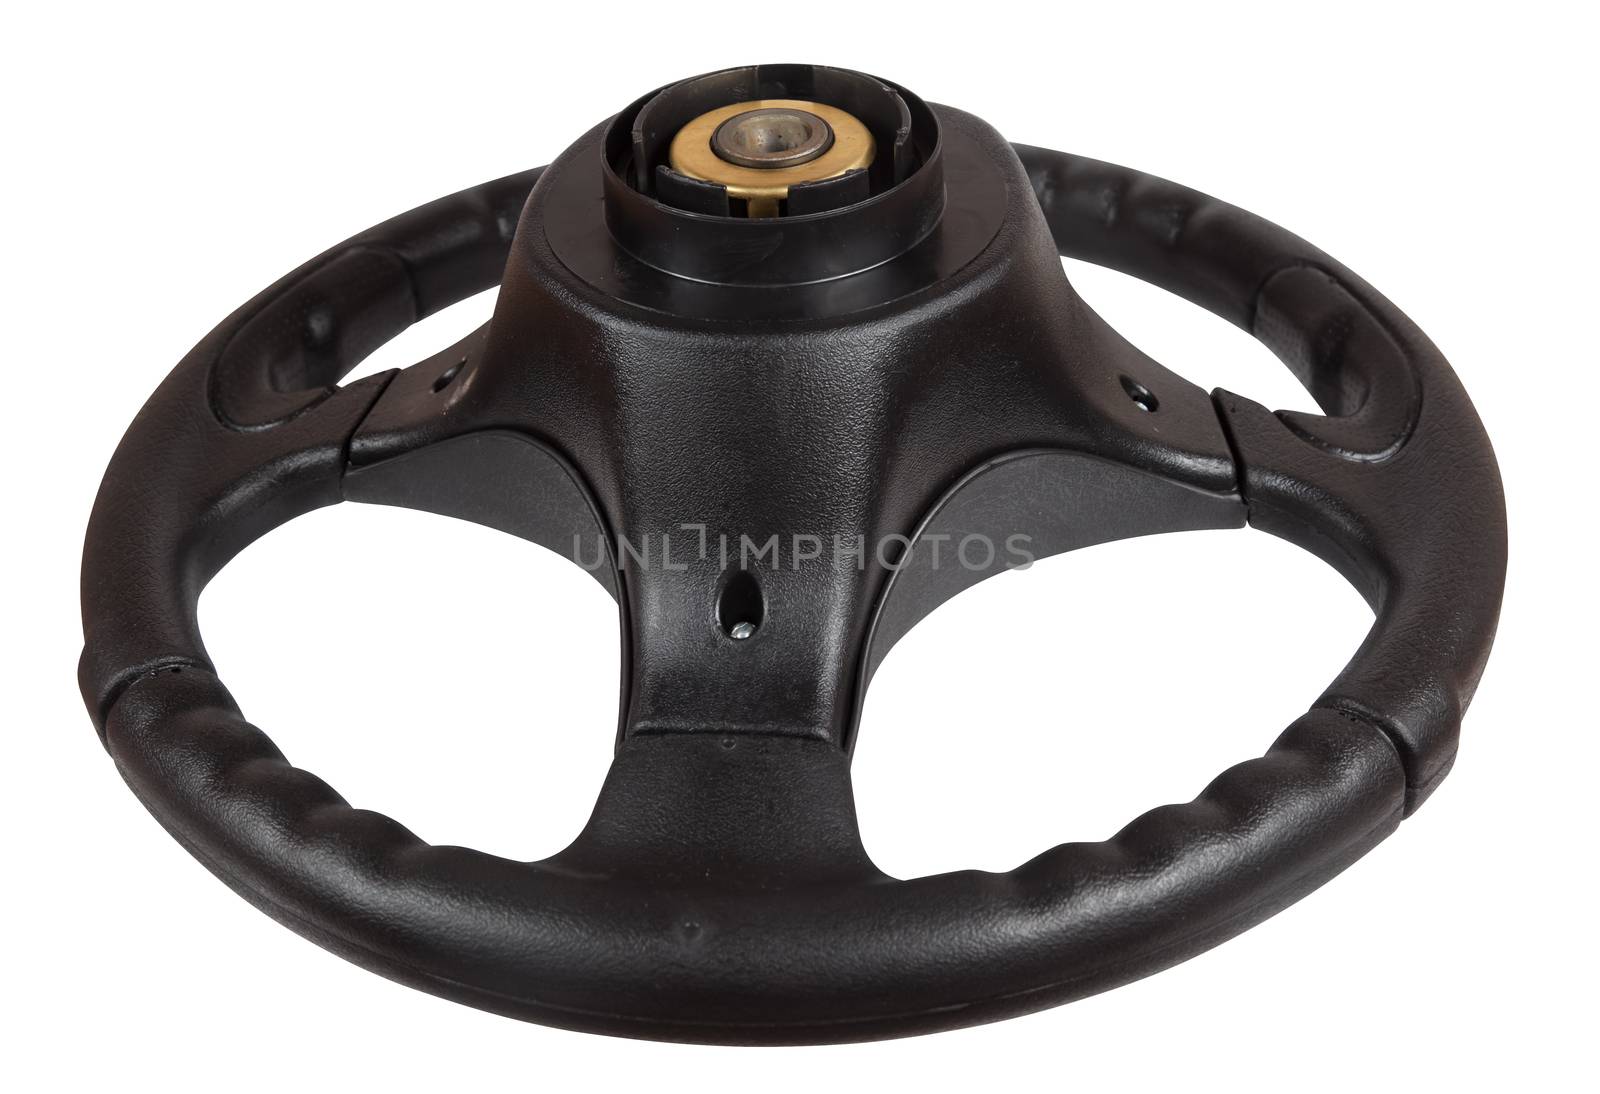 Steering wheel of a car isolated on white background. view from the back side